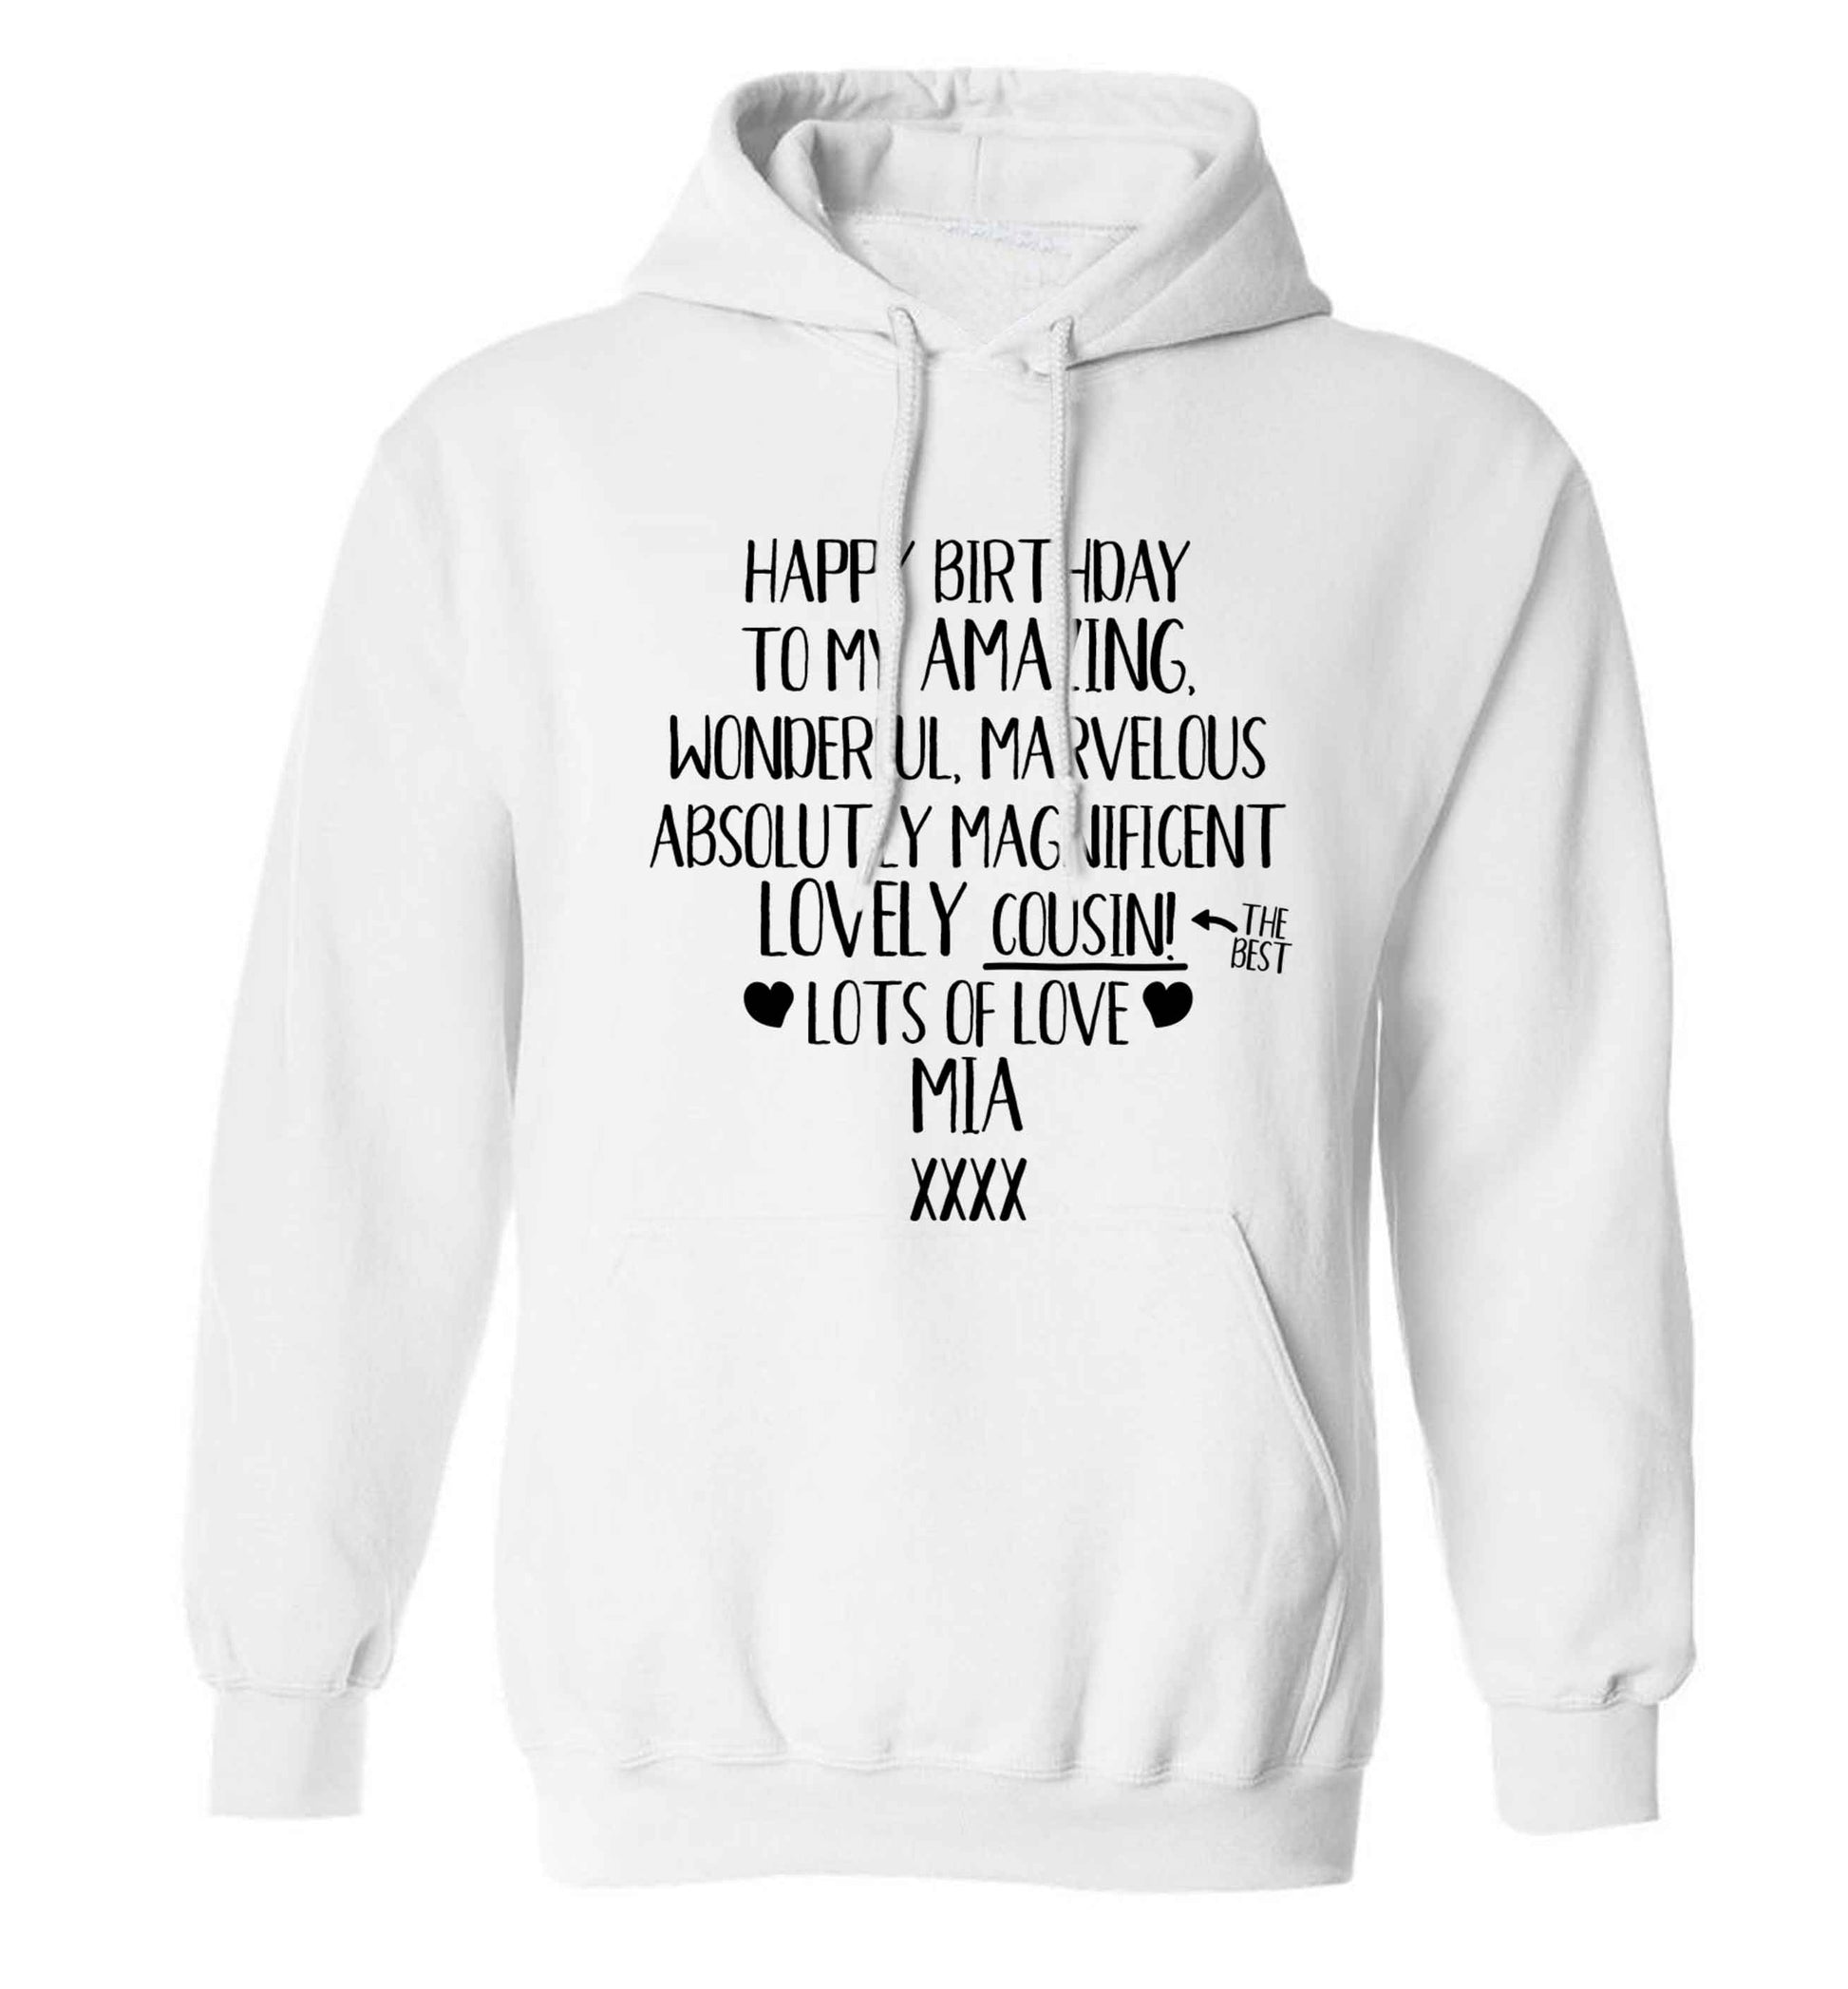 Personalised happy birthday to my amazing, wonderful, lovely cousin adults unisex white hoodie 2XL